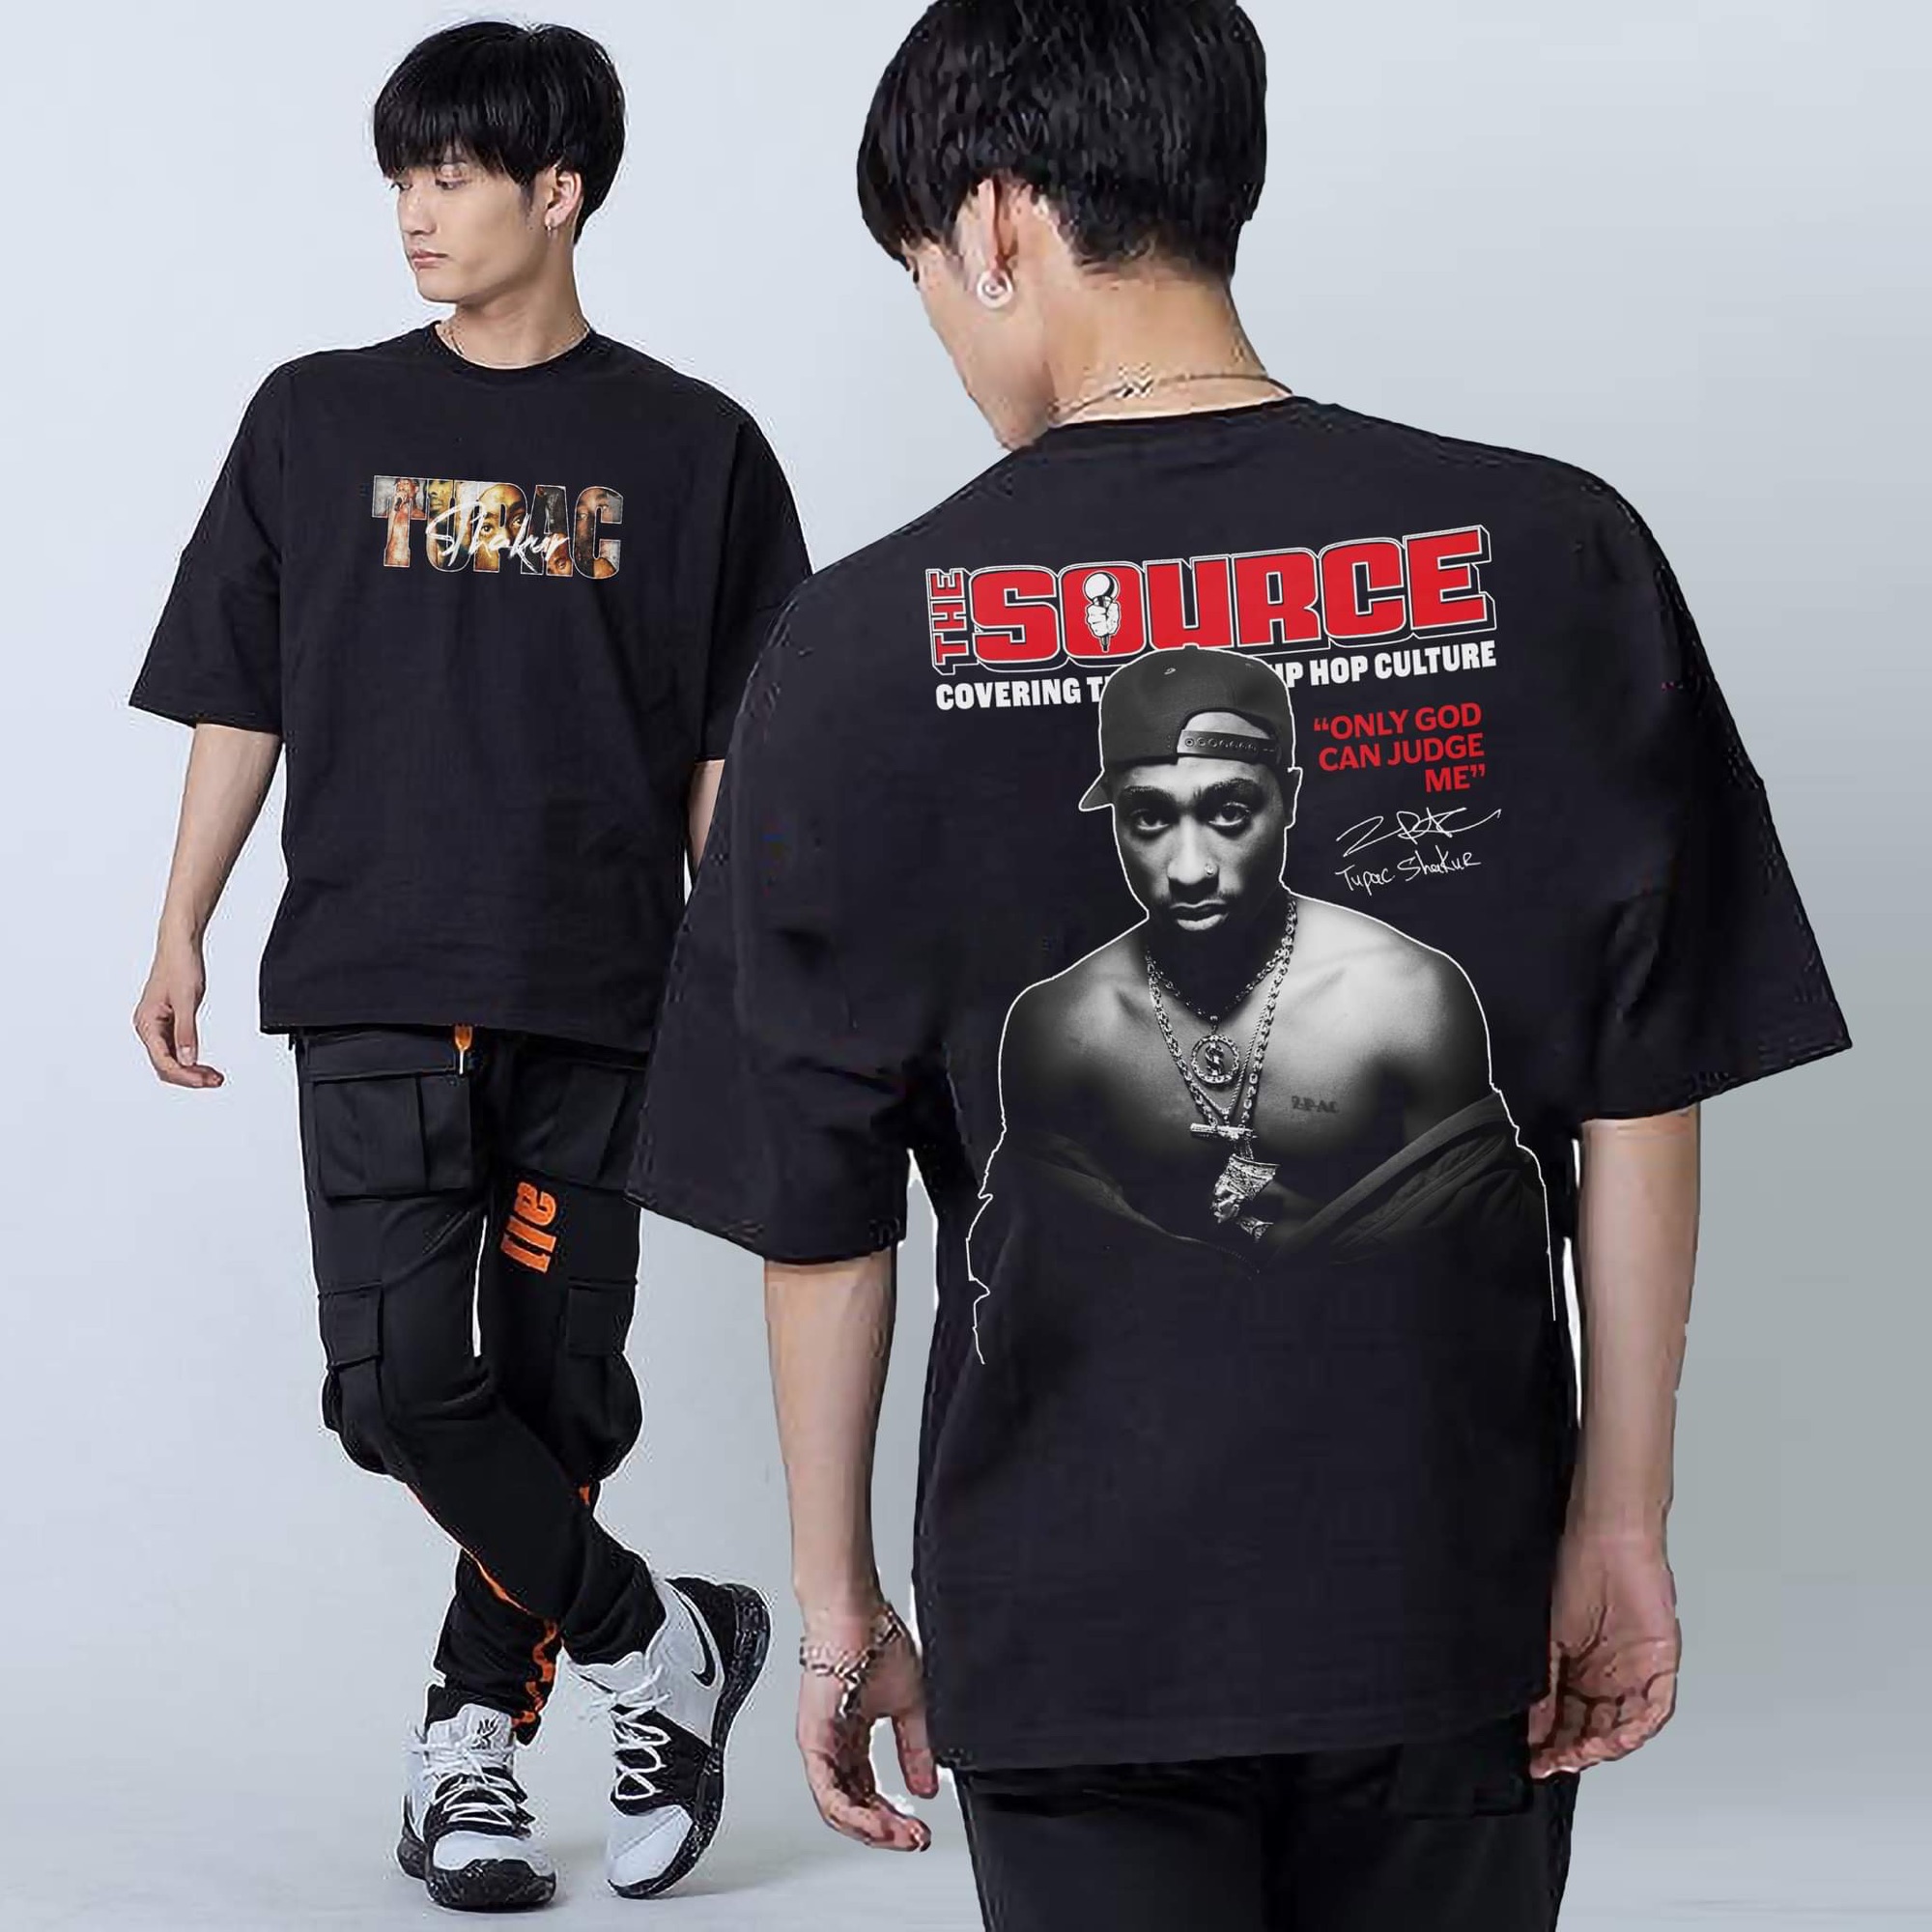 Hiphop outfit with tupac oversize tshirt👍🏻 #outfitideas